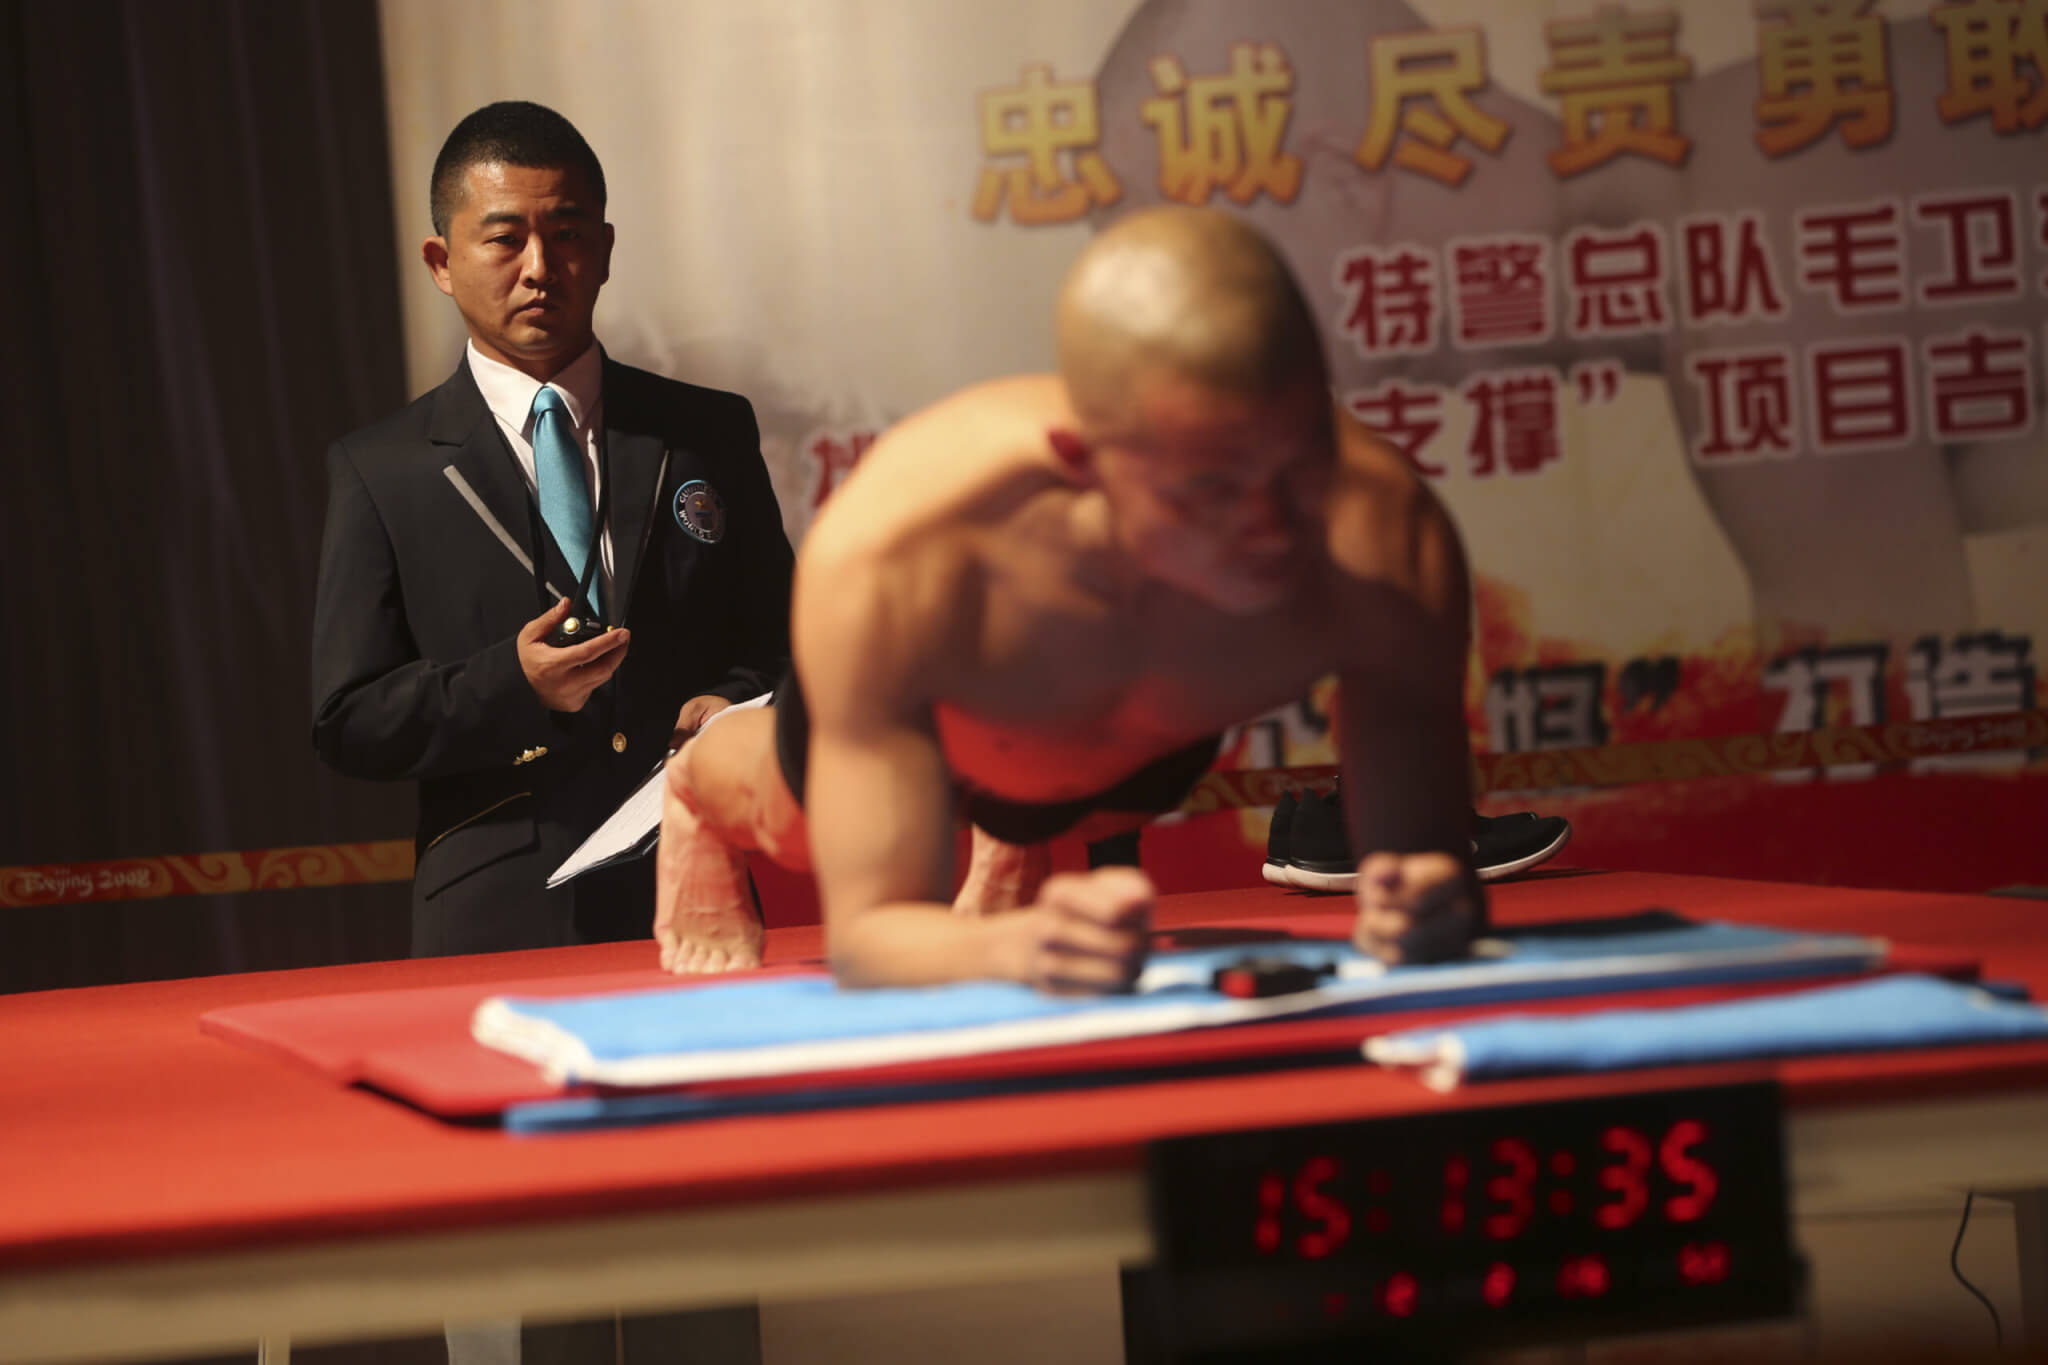 An Official Time Keeper For Guinness World Records Observes Chinese Police Officer Mao Weidong in Plank Position During His Guinness World Record Attempt at the Longest Time in Abdominal Plank Position in Beijing China 26 September 2014 Mao Weidong Broke the Previous Record of 3 Hours 07 Minutes by Achieving a New One of 4 Hours 26 Minutes China Beijing